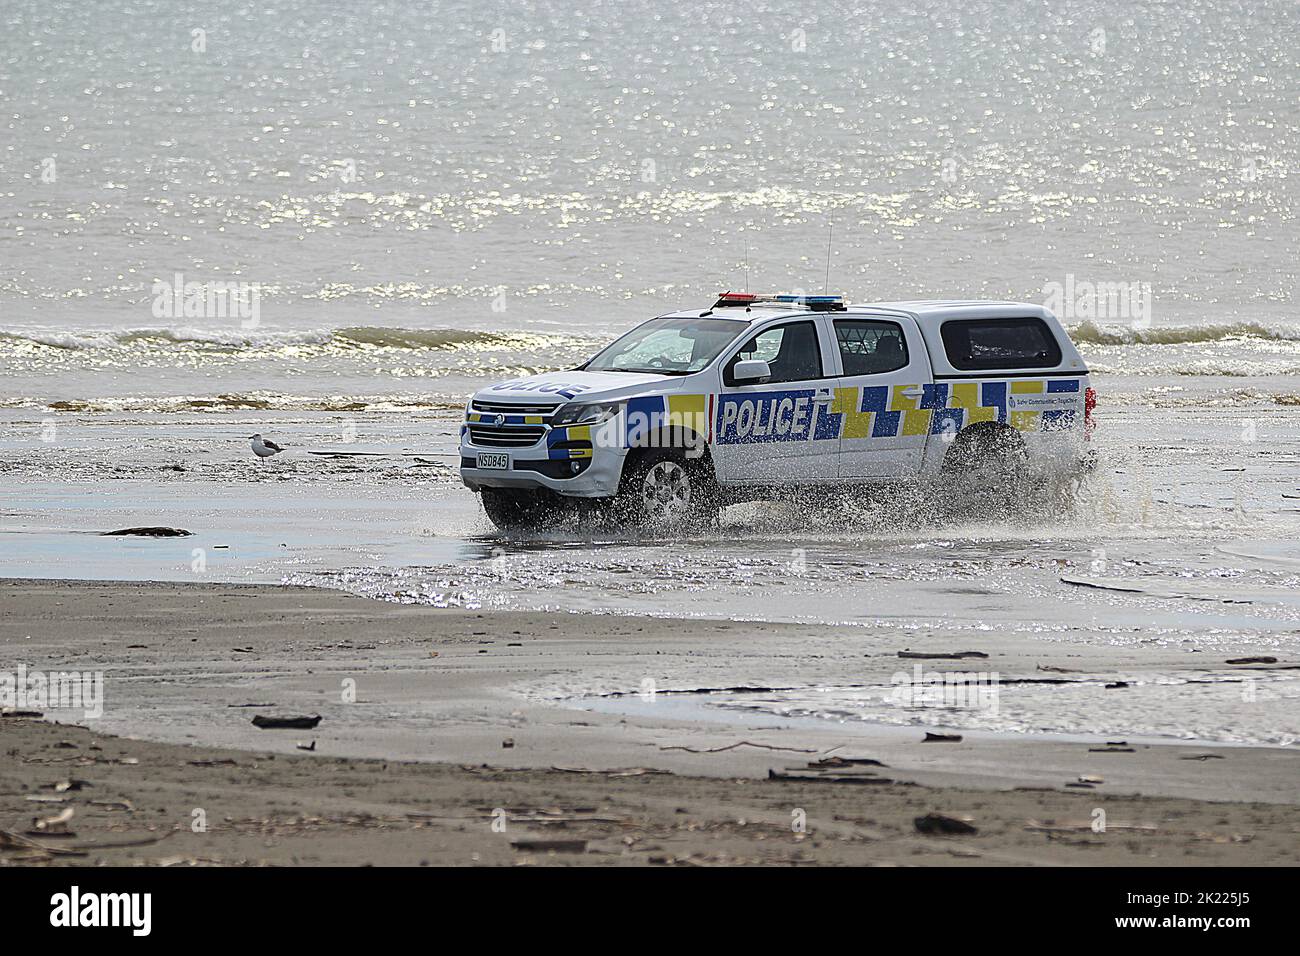 New Zealand police vehicle driving on beach Stock Photo